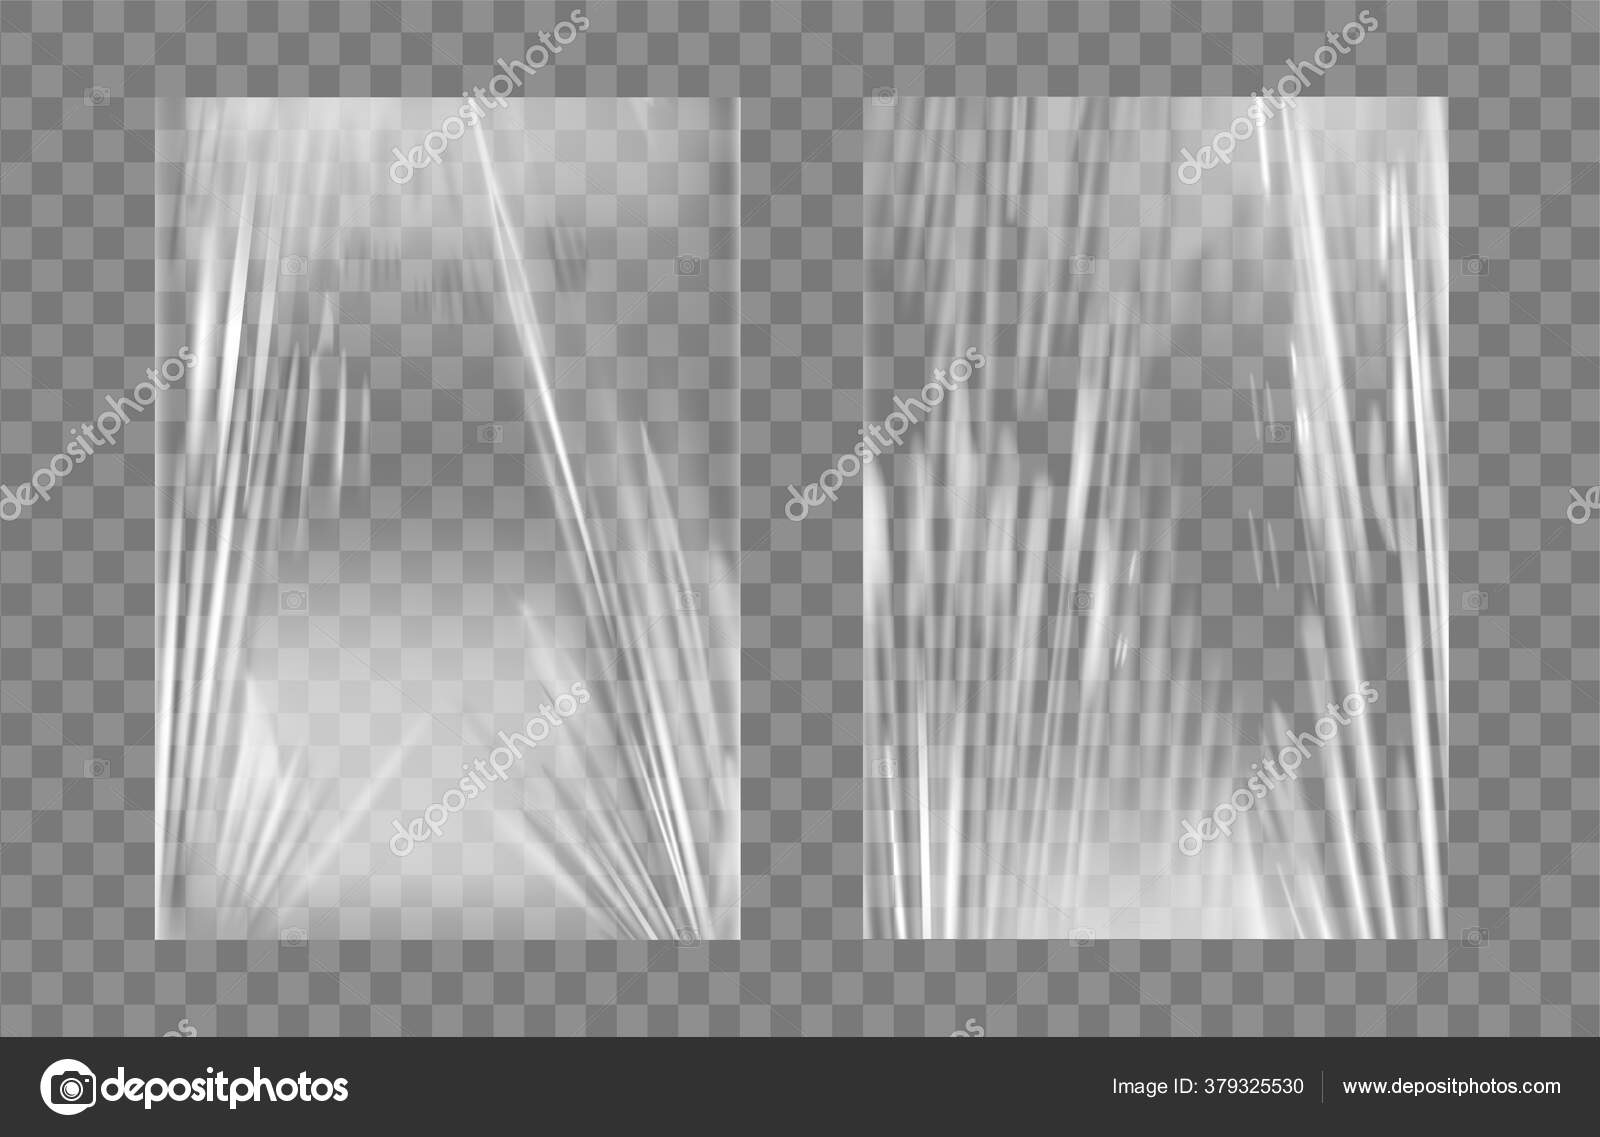 ᐈ Plastic Shrink Wrap Textures Stock Pictures Royalty Free Stretch Film Vectors Download On Depositphotos